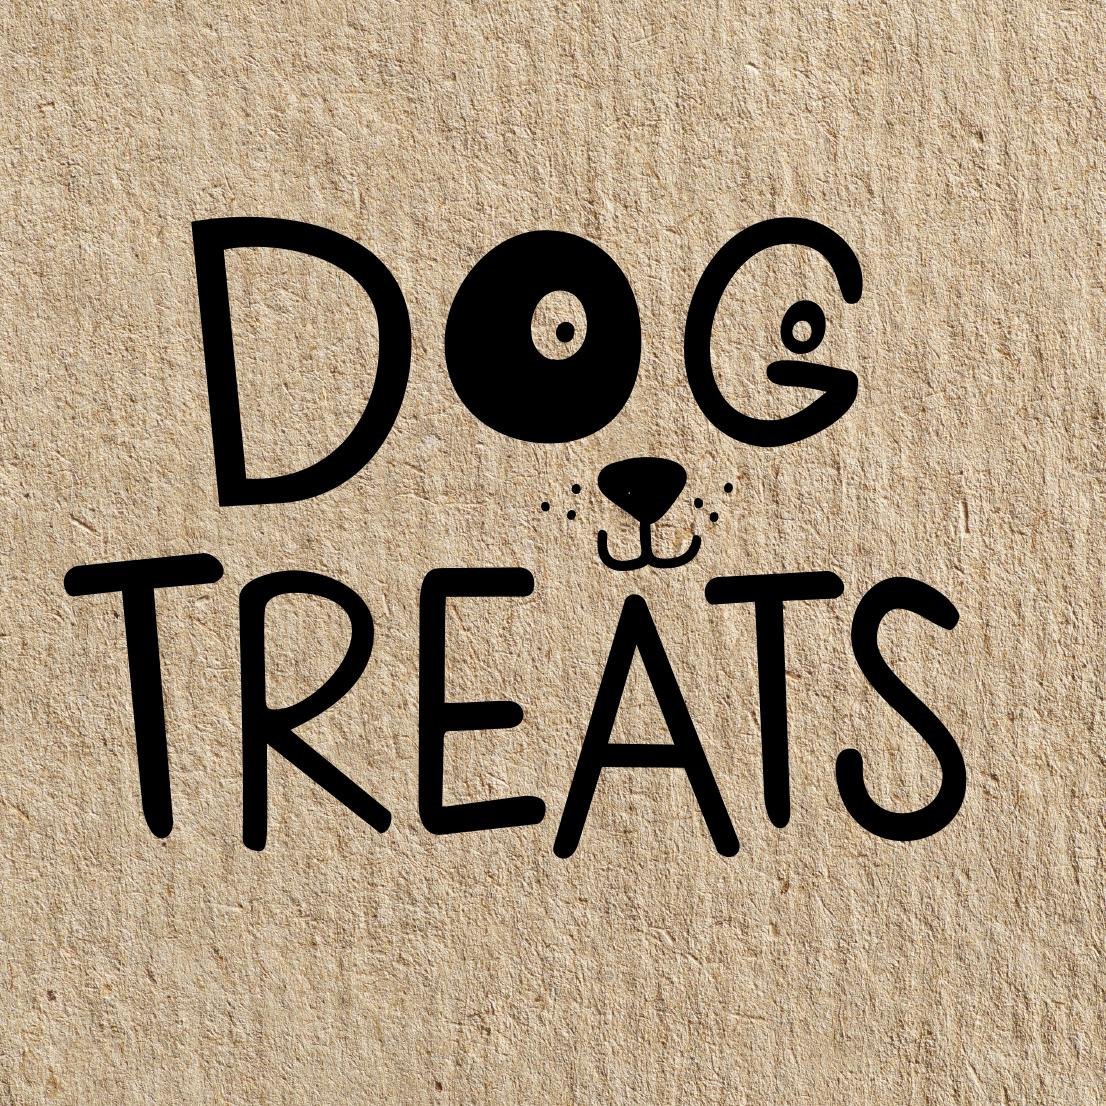 Dog Treats - Not just 100% air dried!